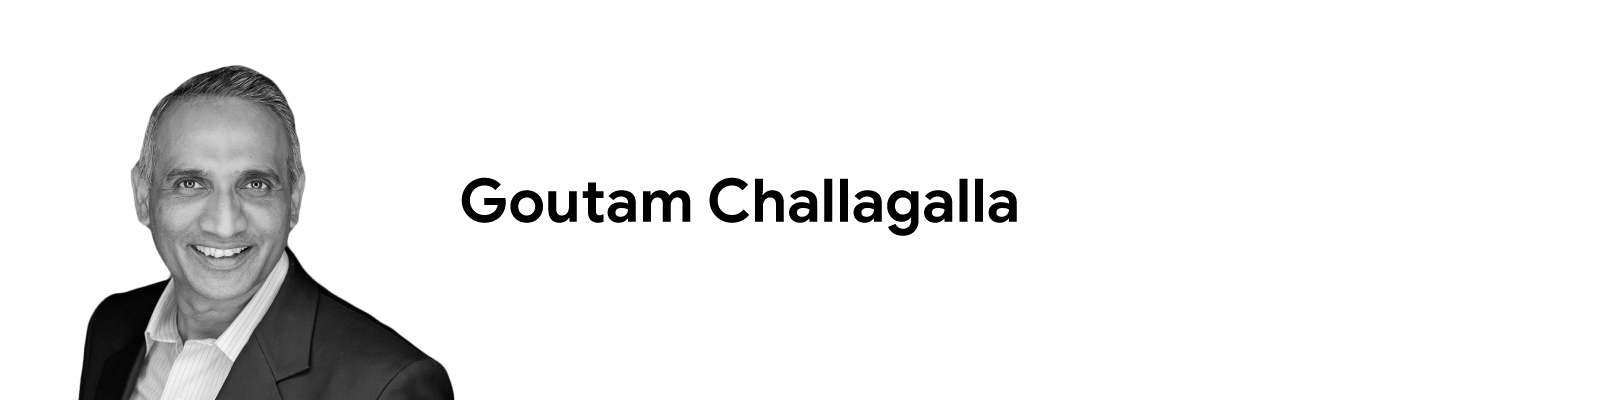 Black-and-white headshot of Goutam Challagalla, a professor of marketing and strategy at IMD